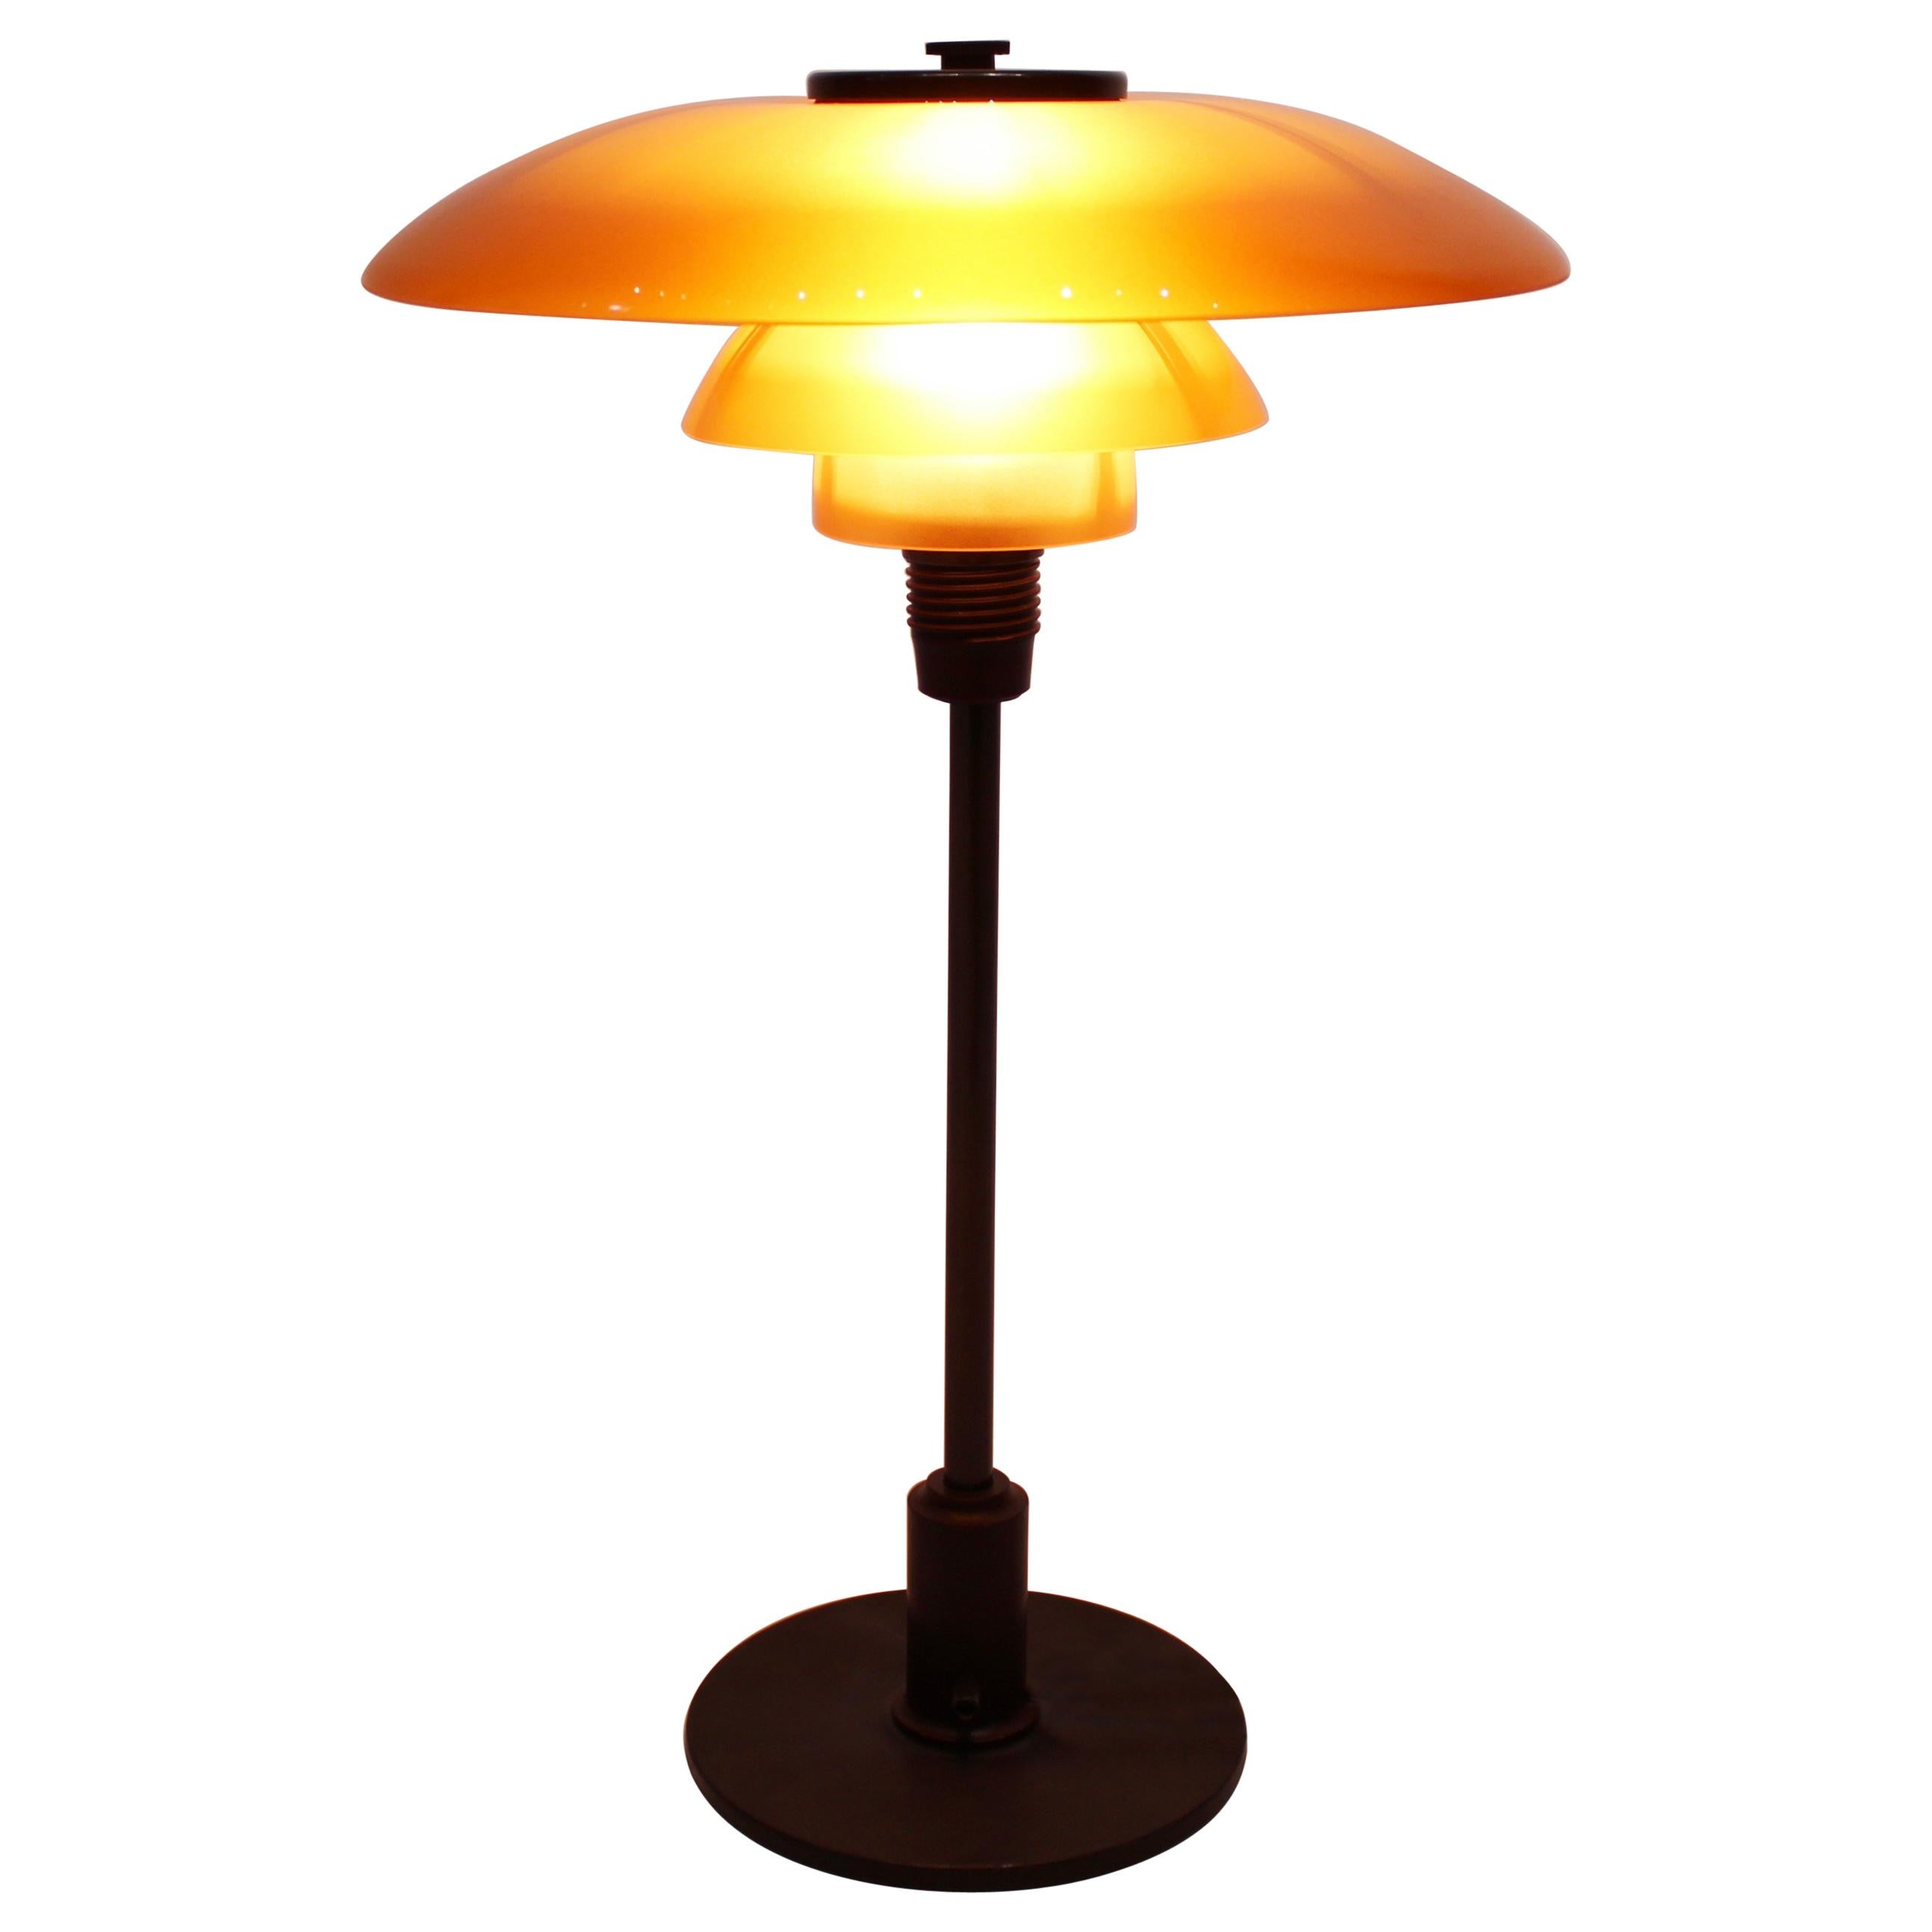 PH 3/2 Tablelamp with Amber Colored Shades, by Poul Henningsen, 1930s